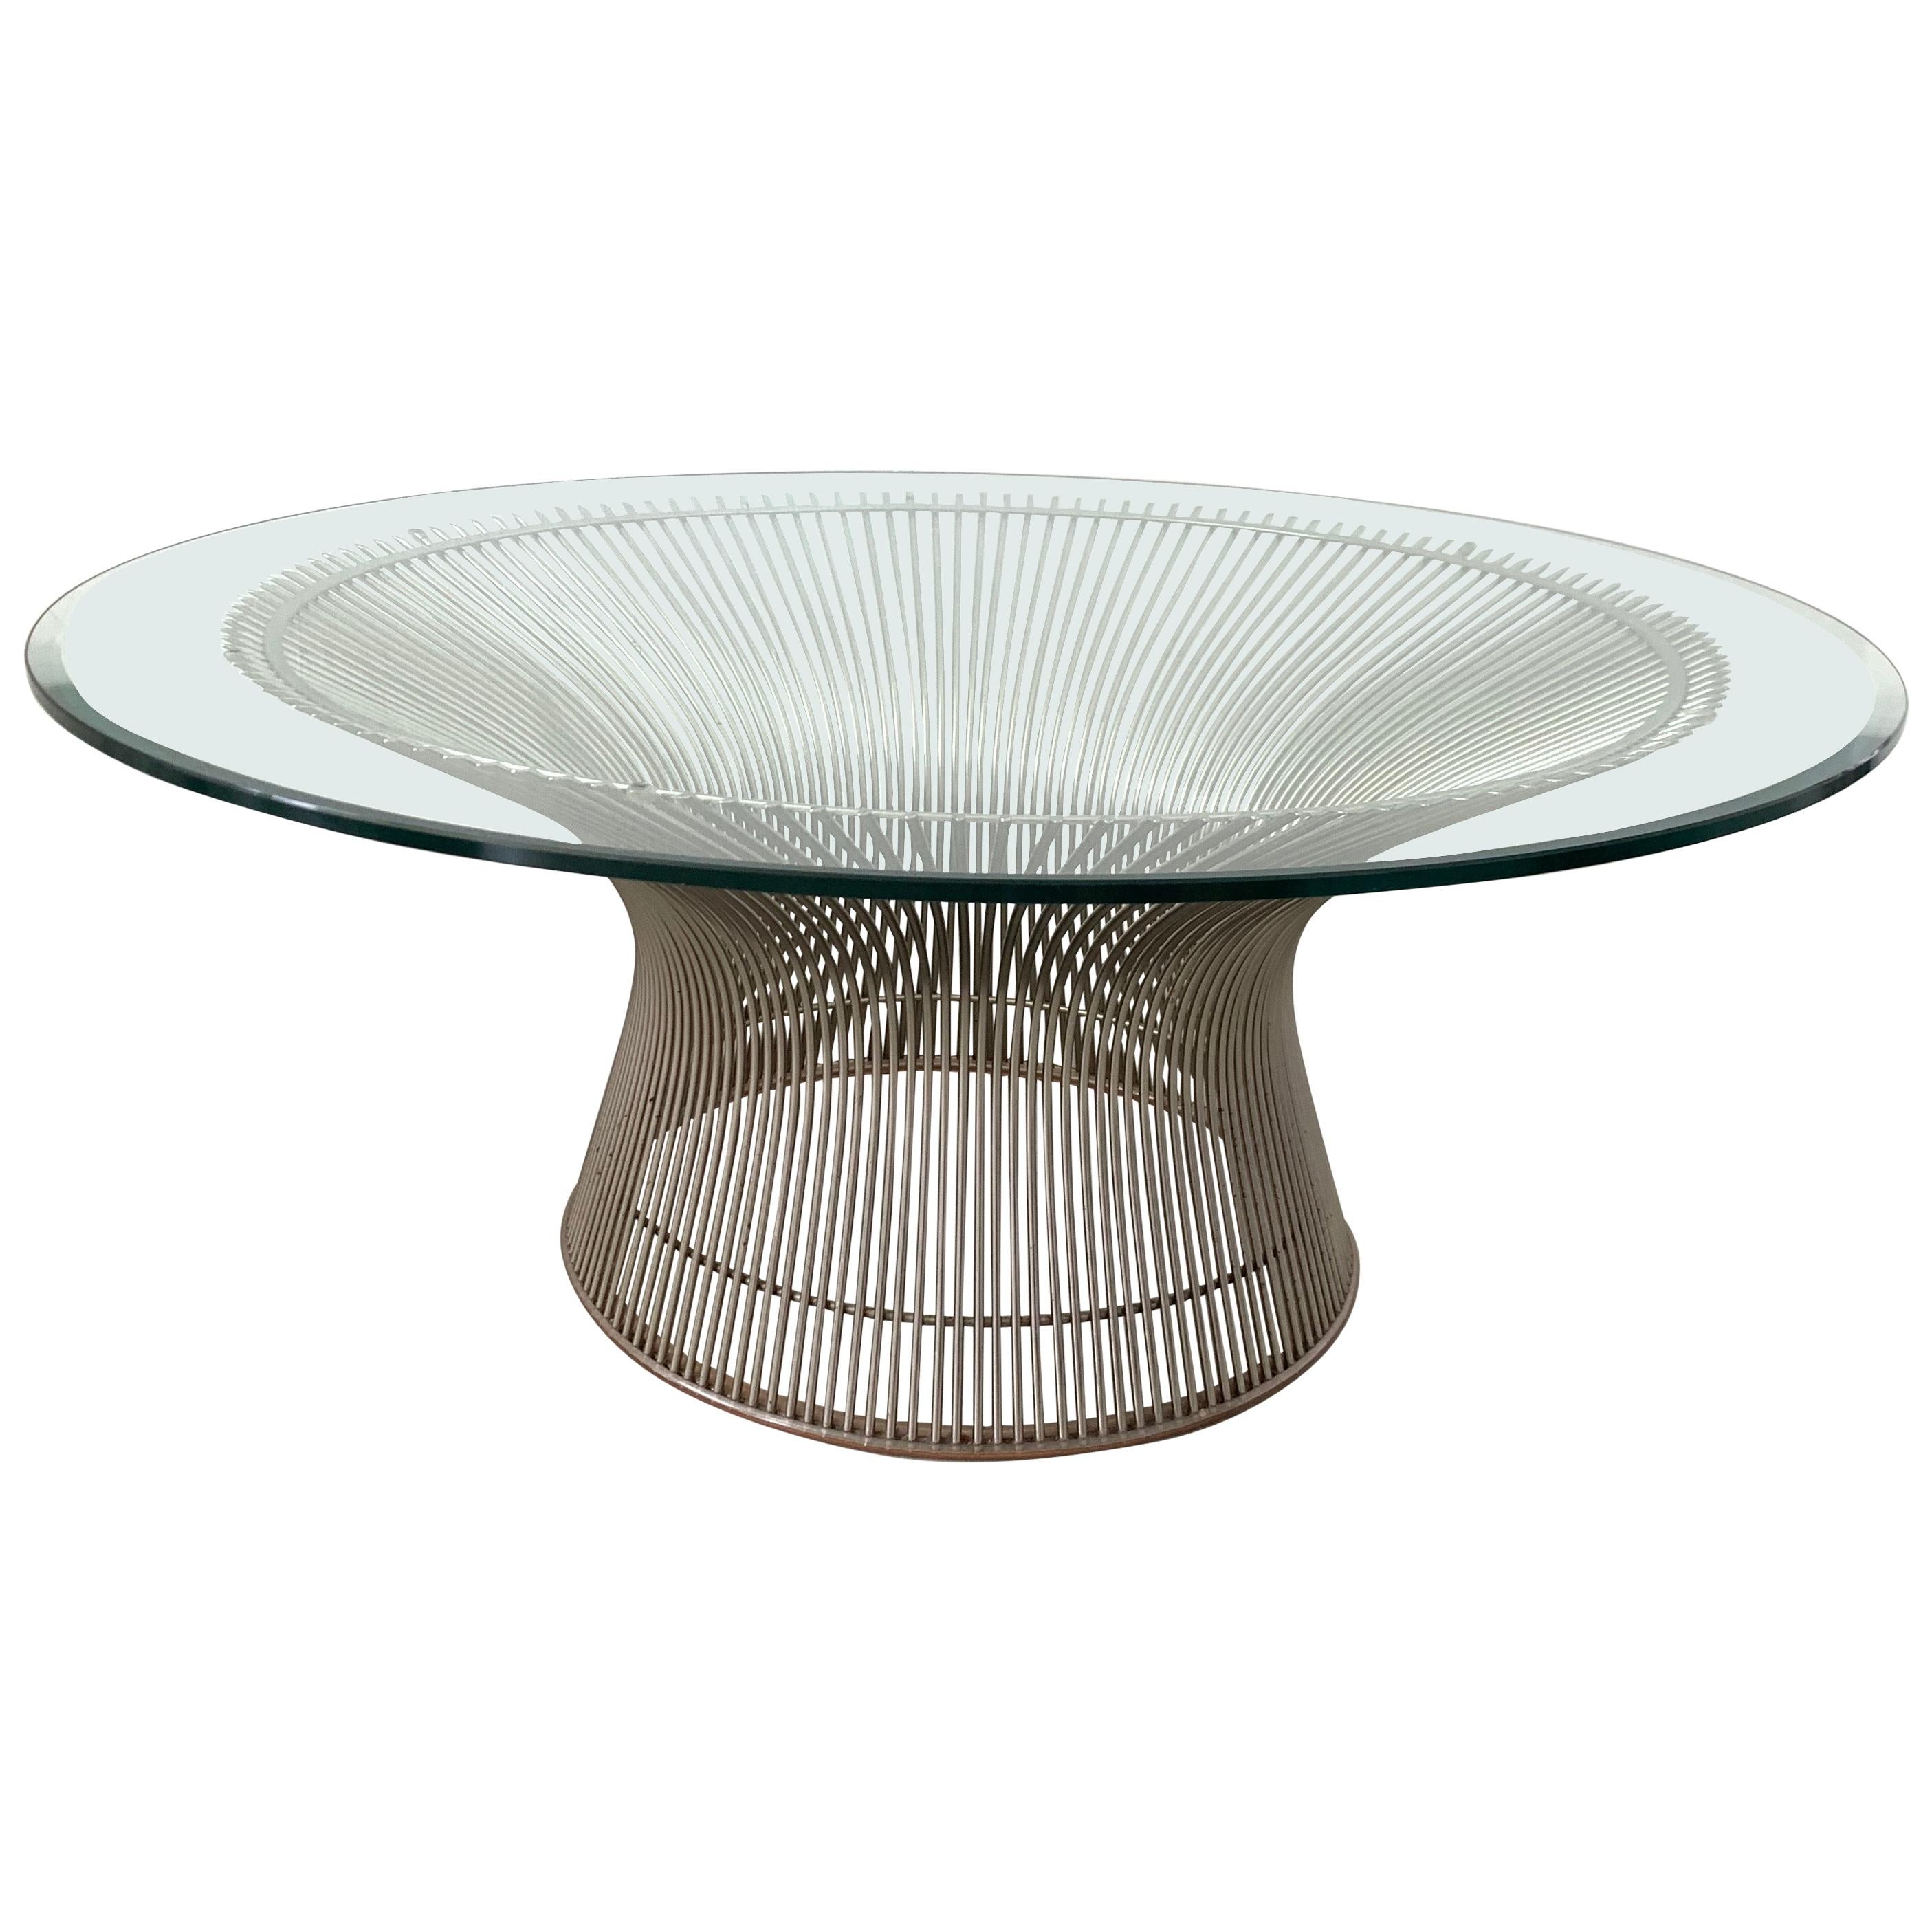 Warren Platner "Wire" Coffee or Cocktail Table for Knoll, USA, 1966